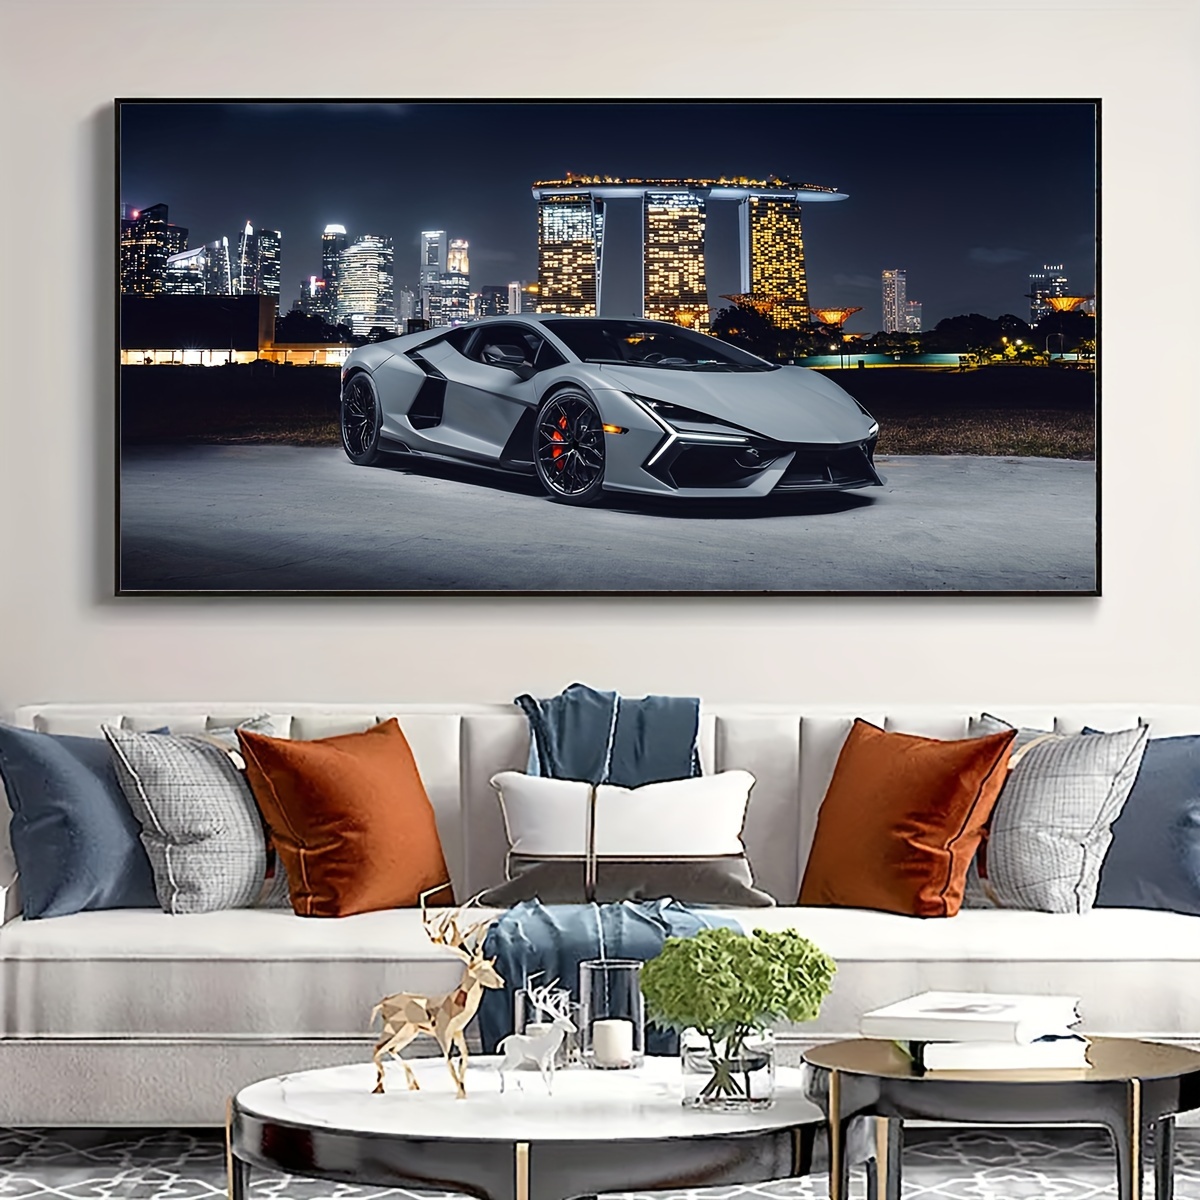 

1pc Unframed Canvas Poster, Modern Art, Architectural Night View Sports Car Wall Art, Ideal Gift For Bedroom Living Room Corridor, Wall Art, Wall Decor, Winter Decor, Room Decoration